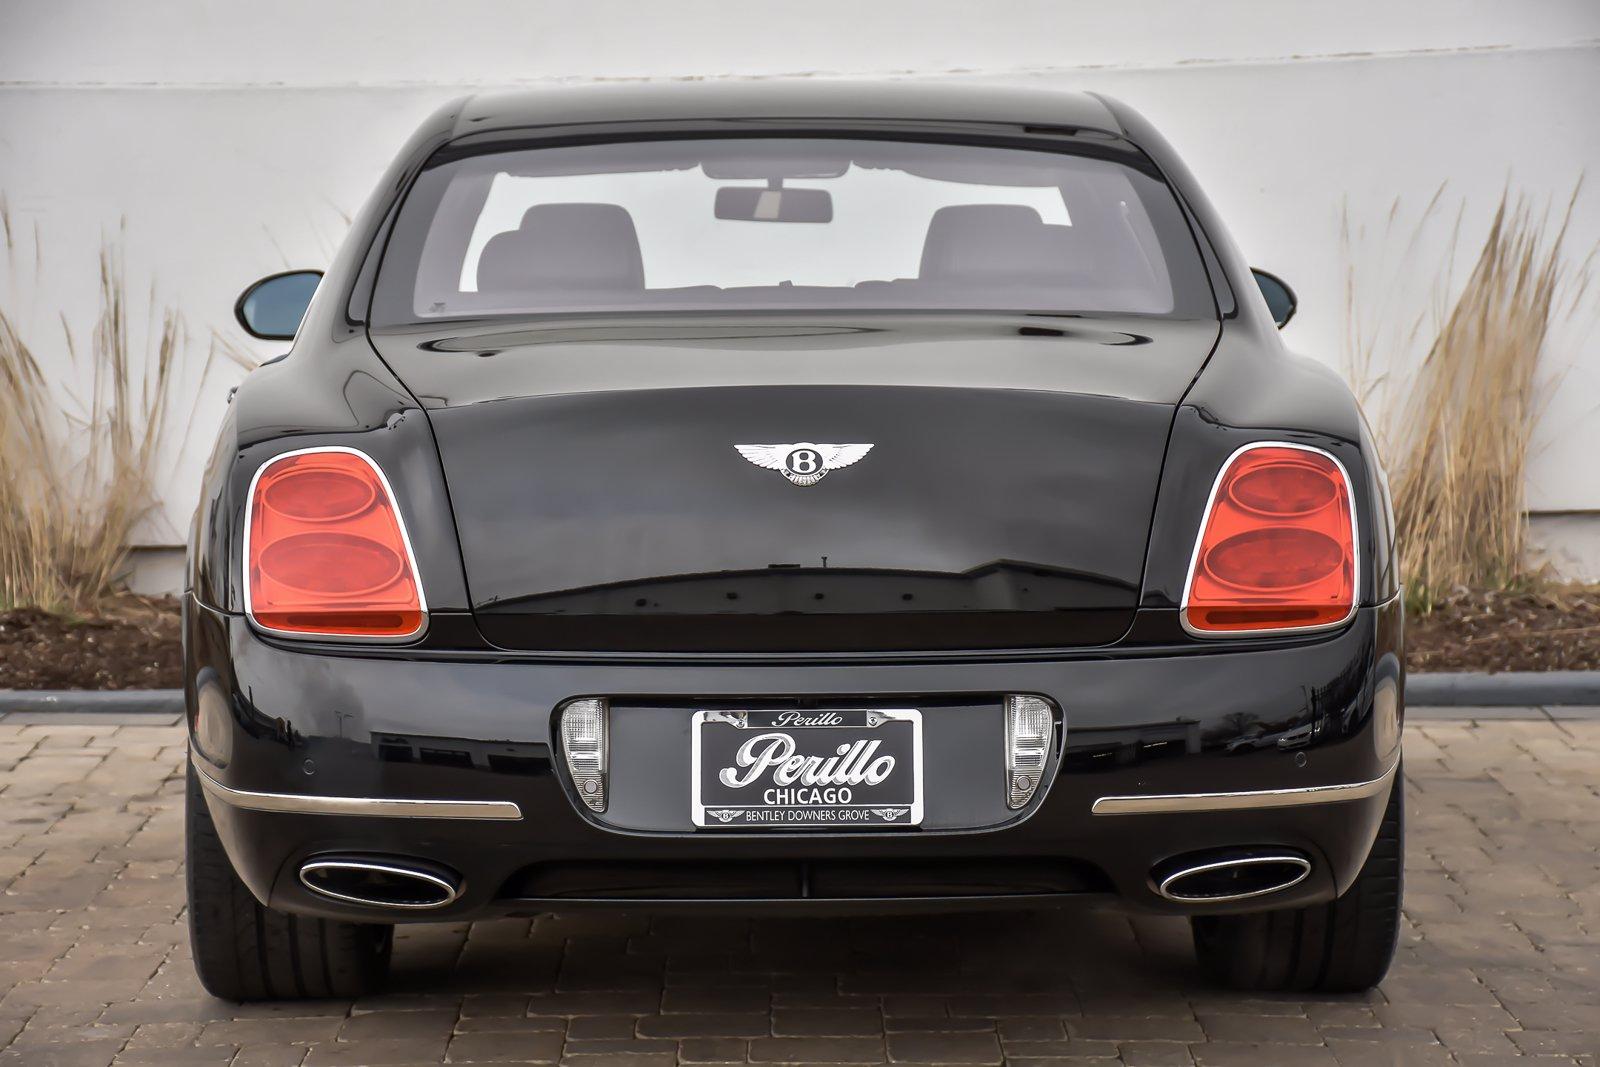 Used 2012 Bentley Continental Flying Spur Speed | Downers Grove, IL